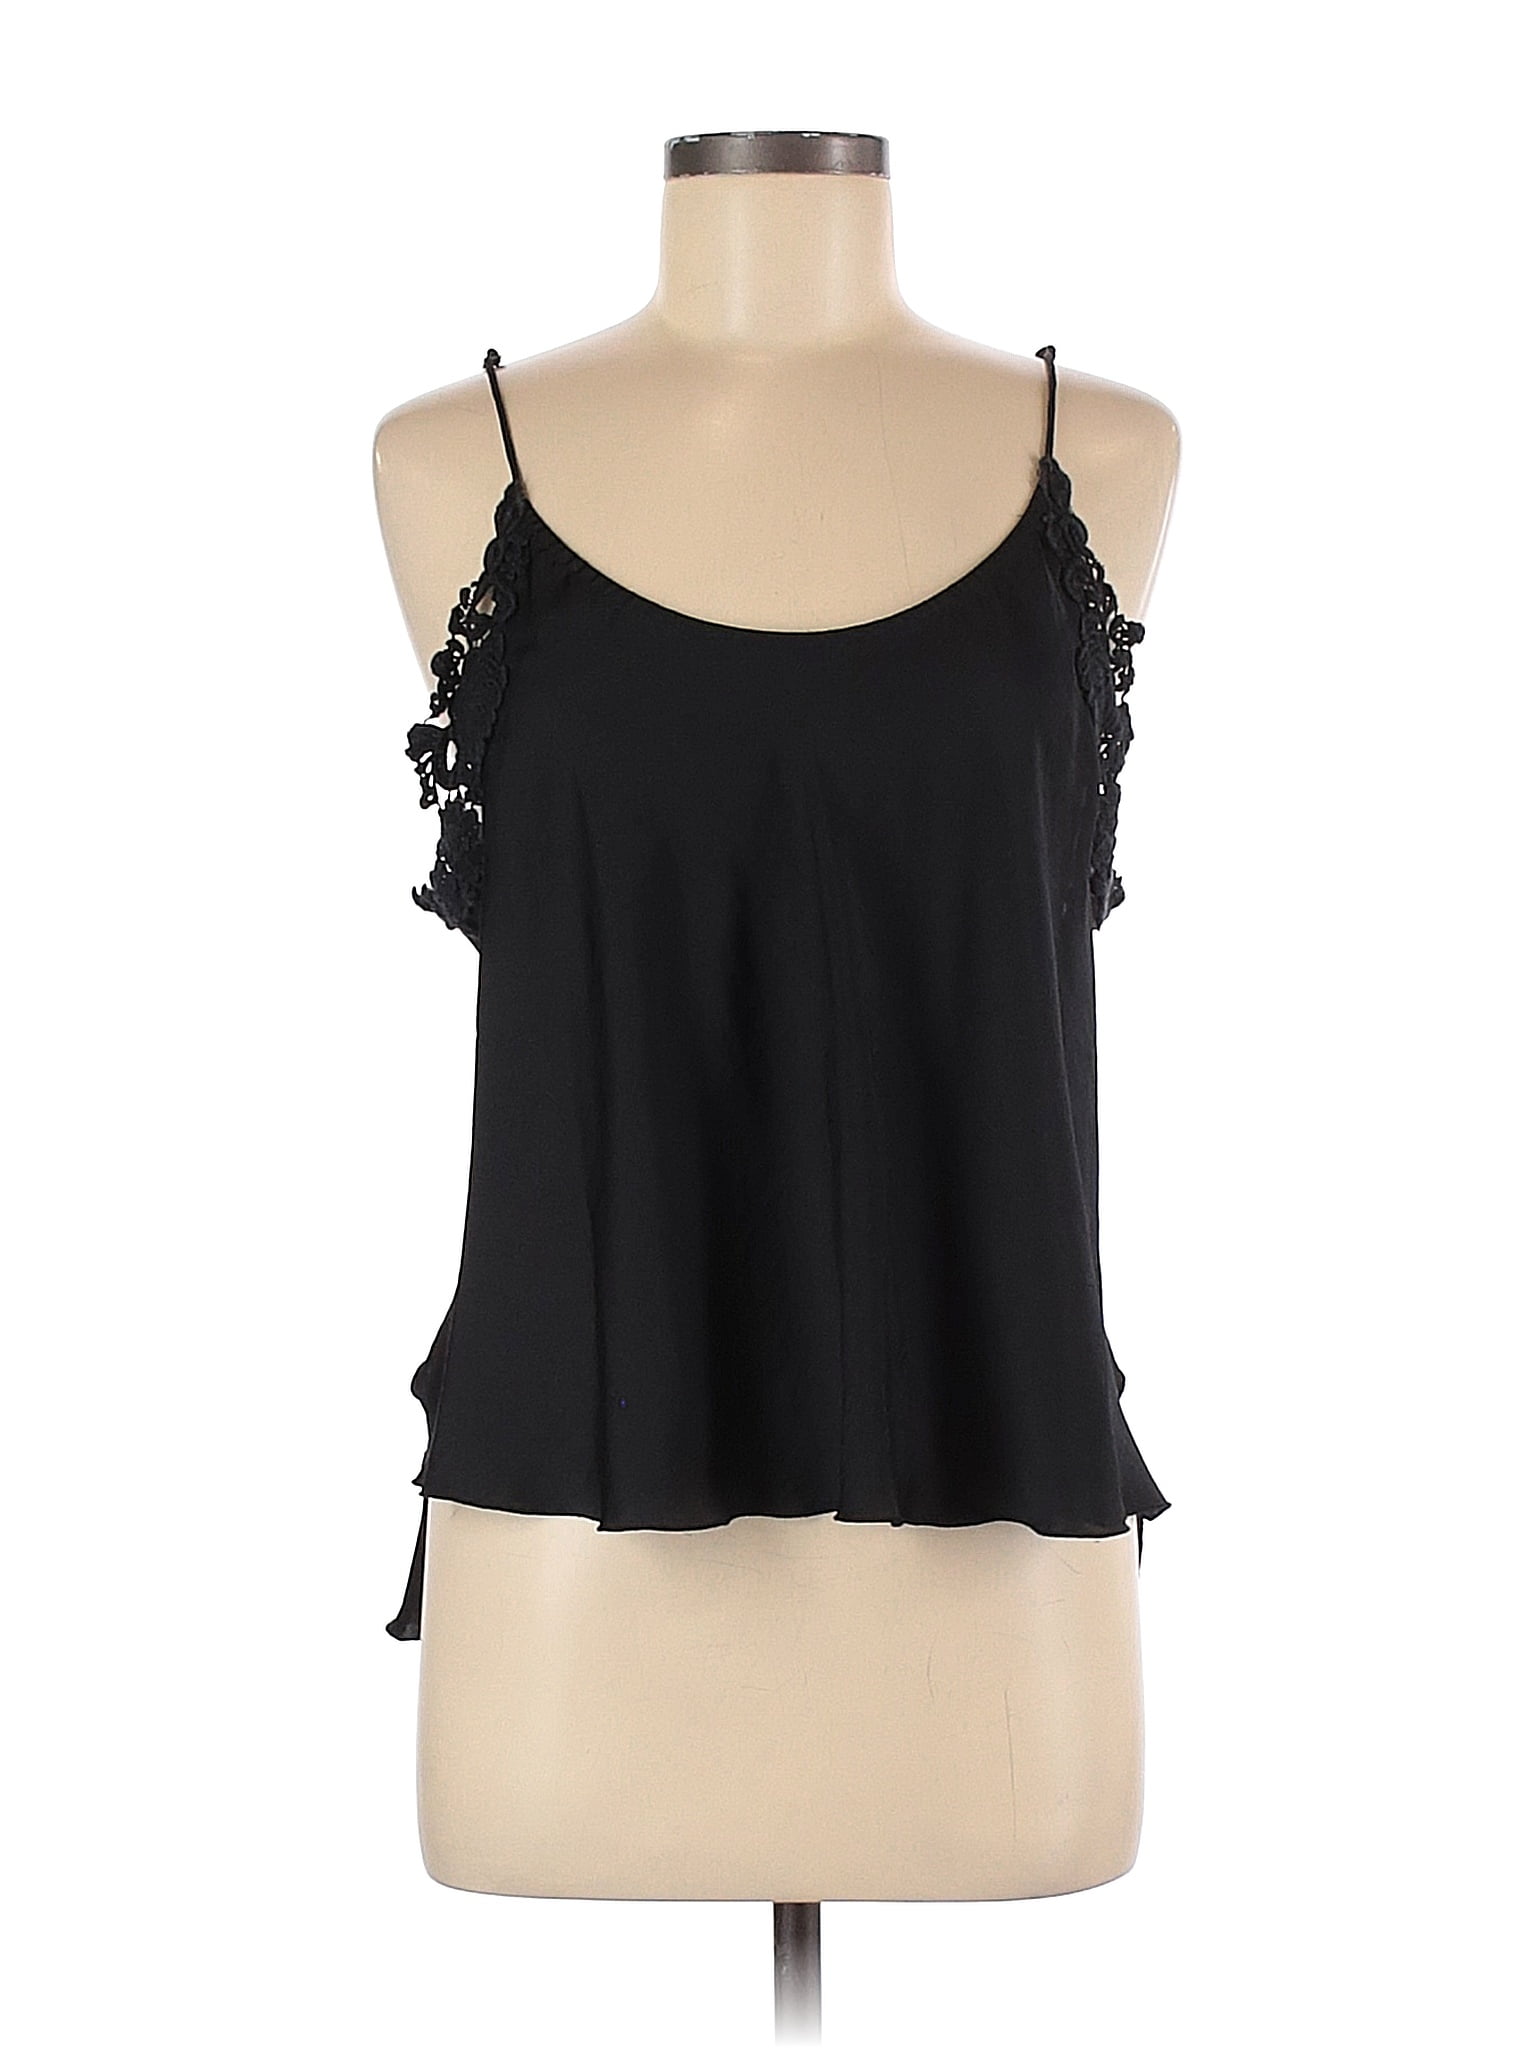 Intimately by Free People 100% Polyester Black Sleeveless Blouse Size M ...